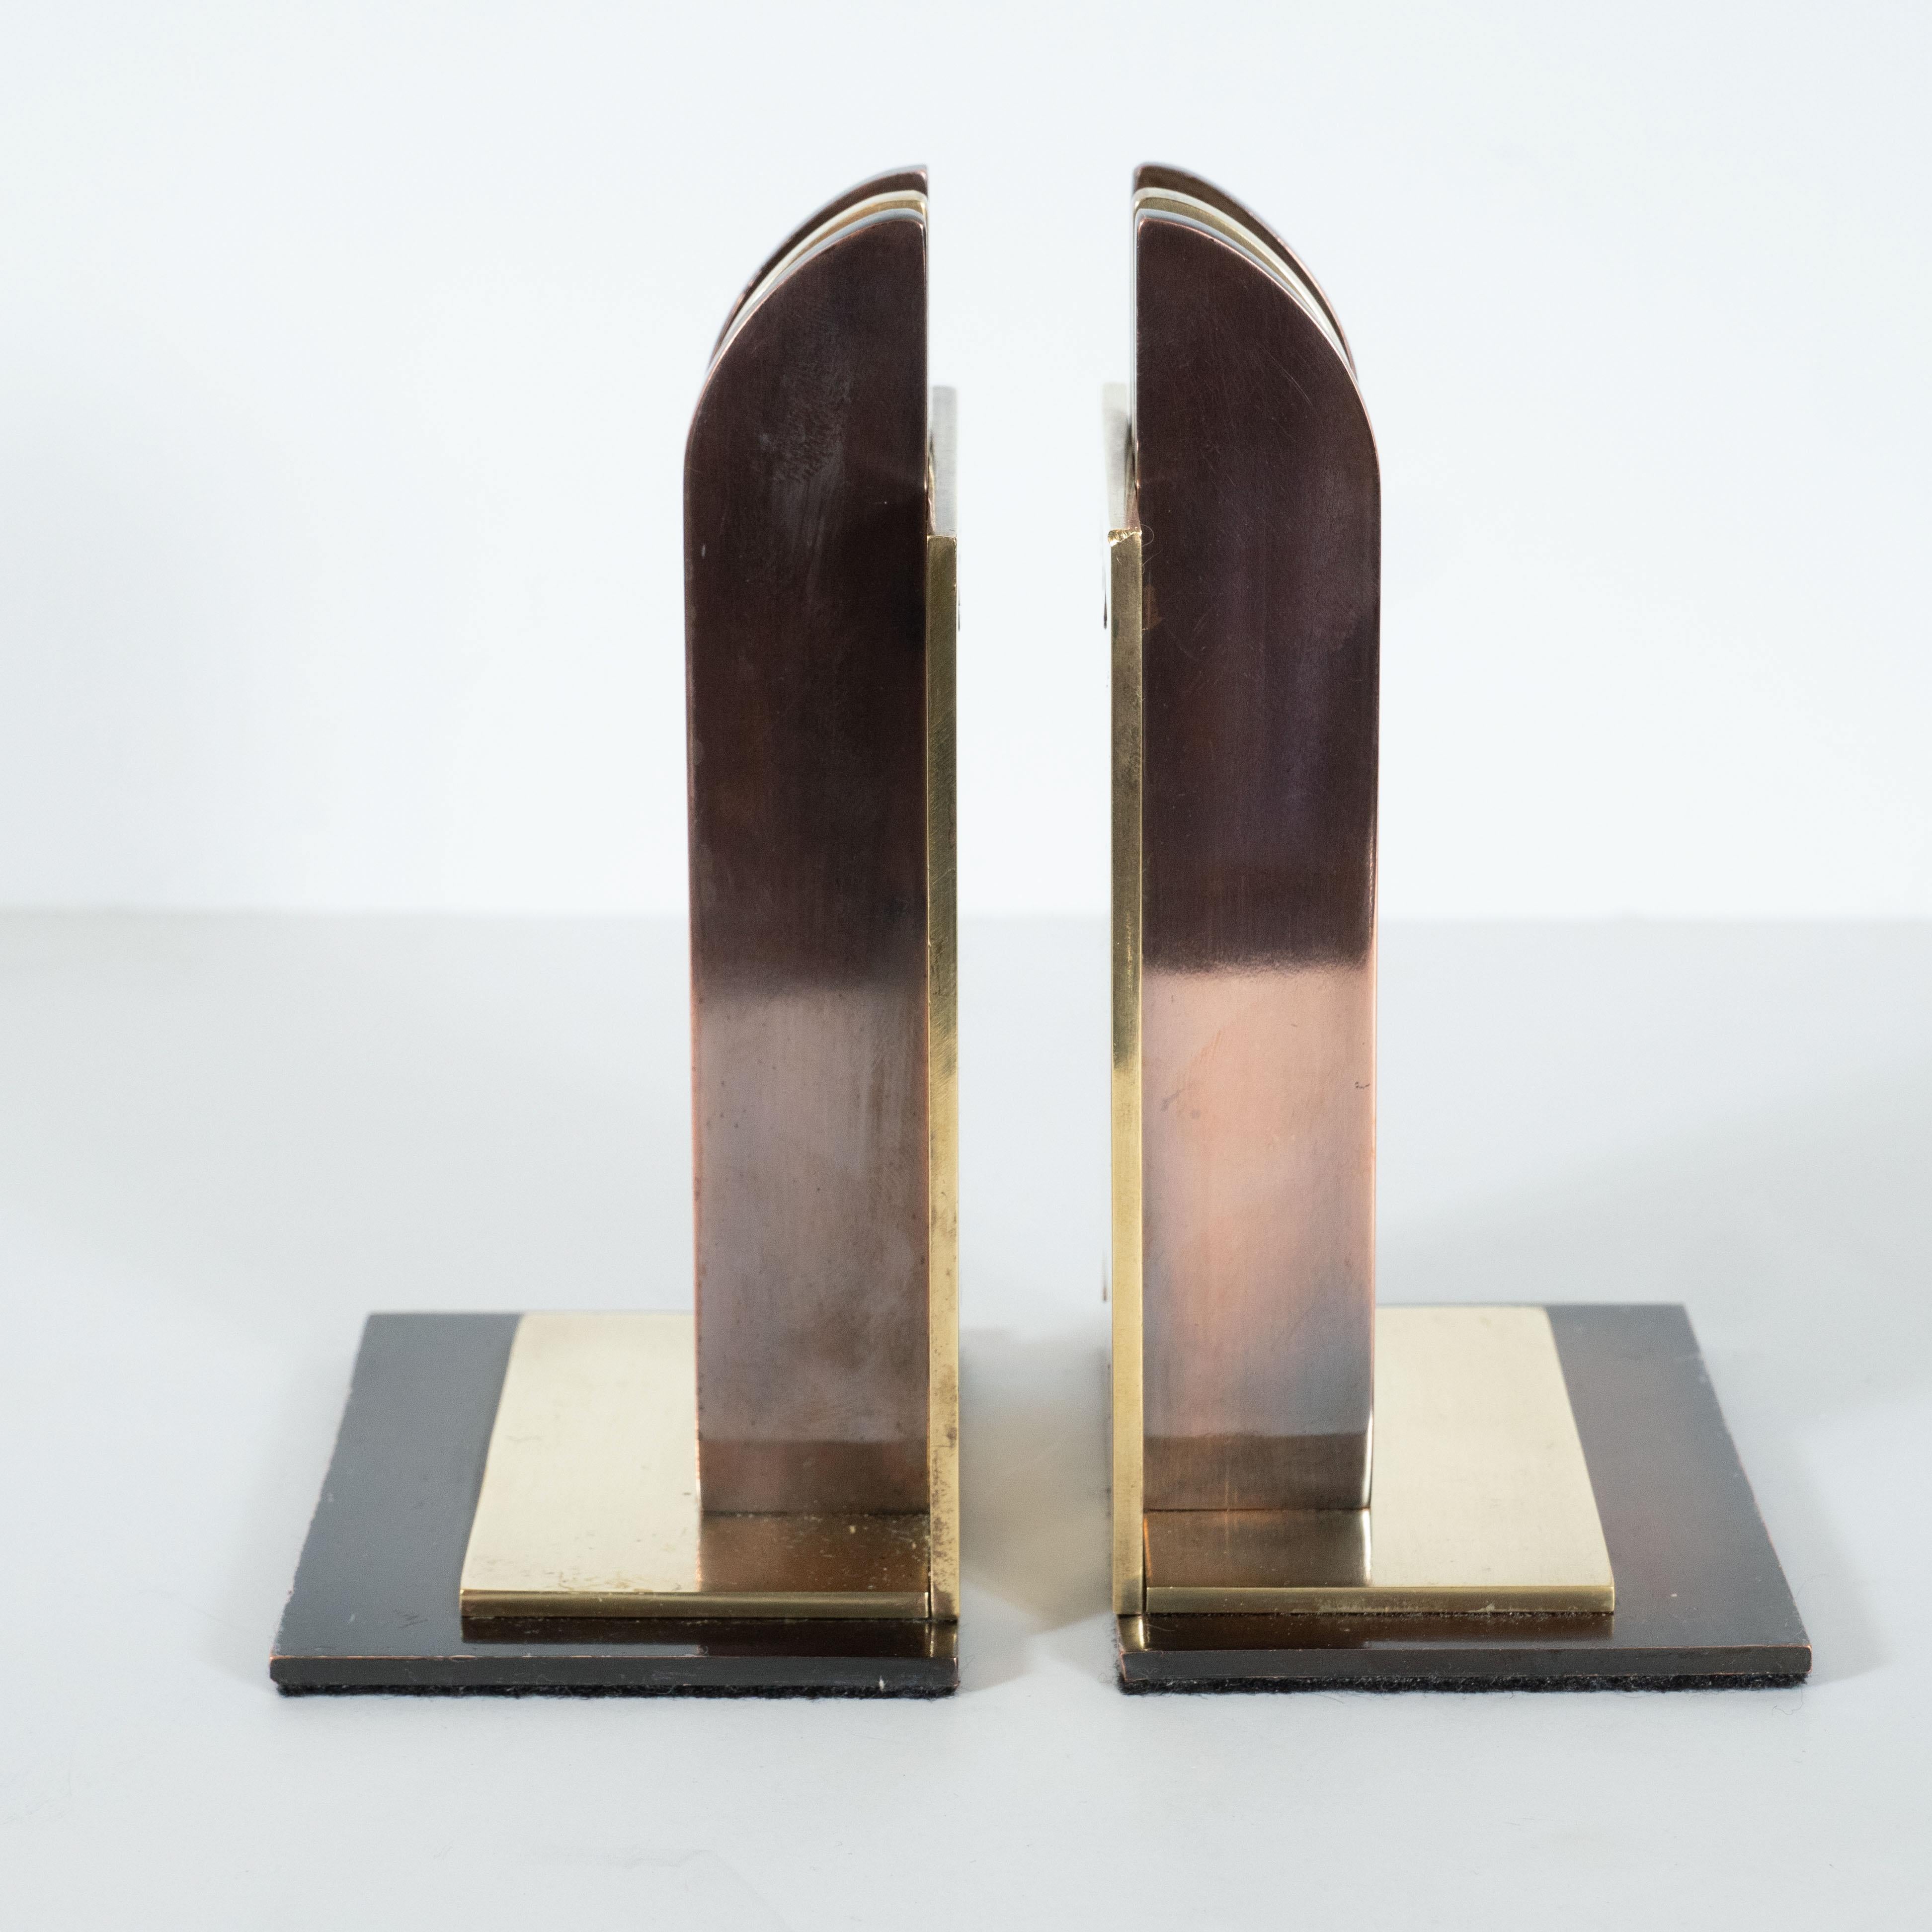 This stunning pair of Machine Age Art Deco bookends were realized by the illustrious 20th century designer Walter Von Nessen for Chase Co. in America, circa 1930. It features a skyscraper style base composed of a rectangular copper base with a brass